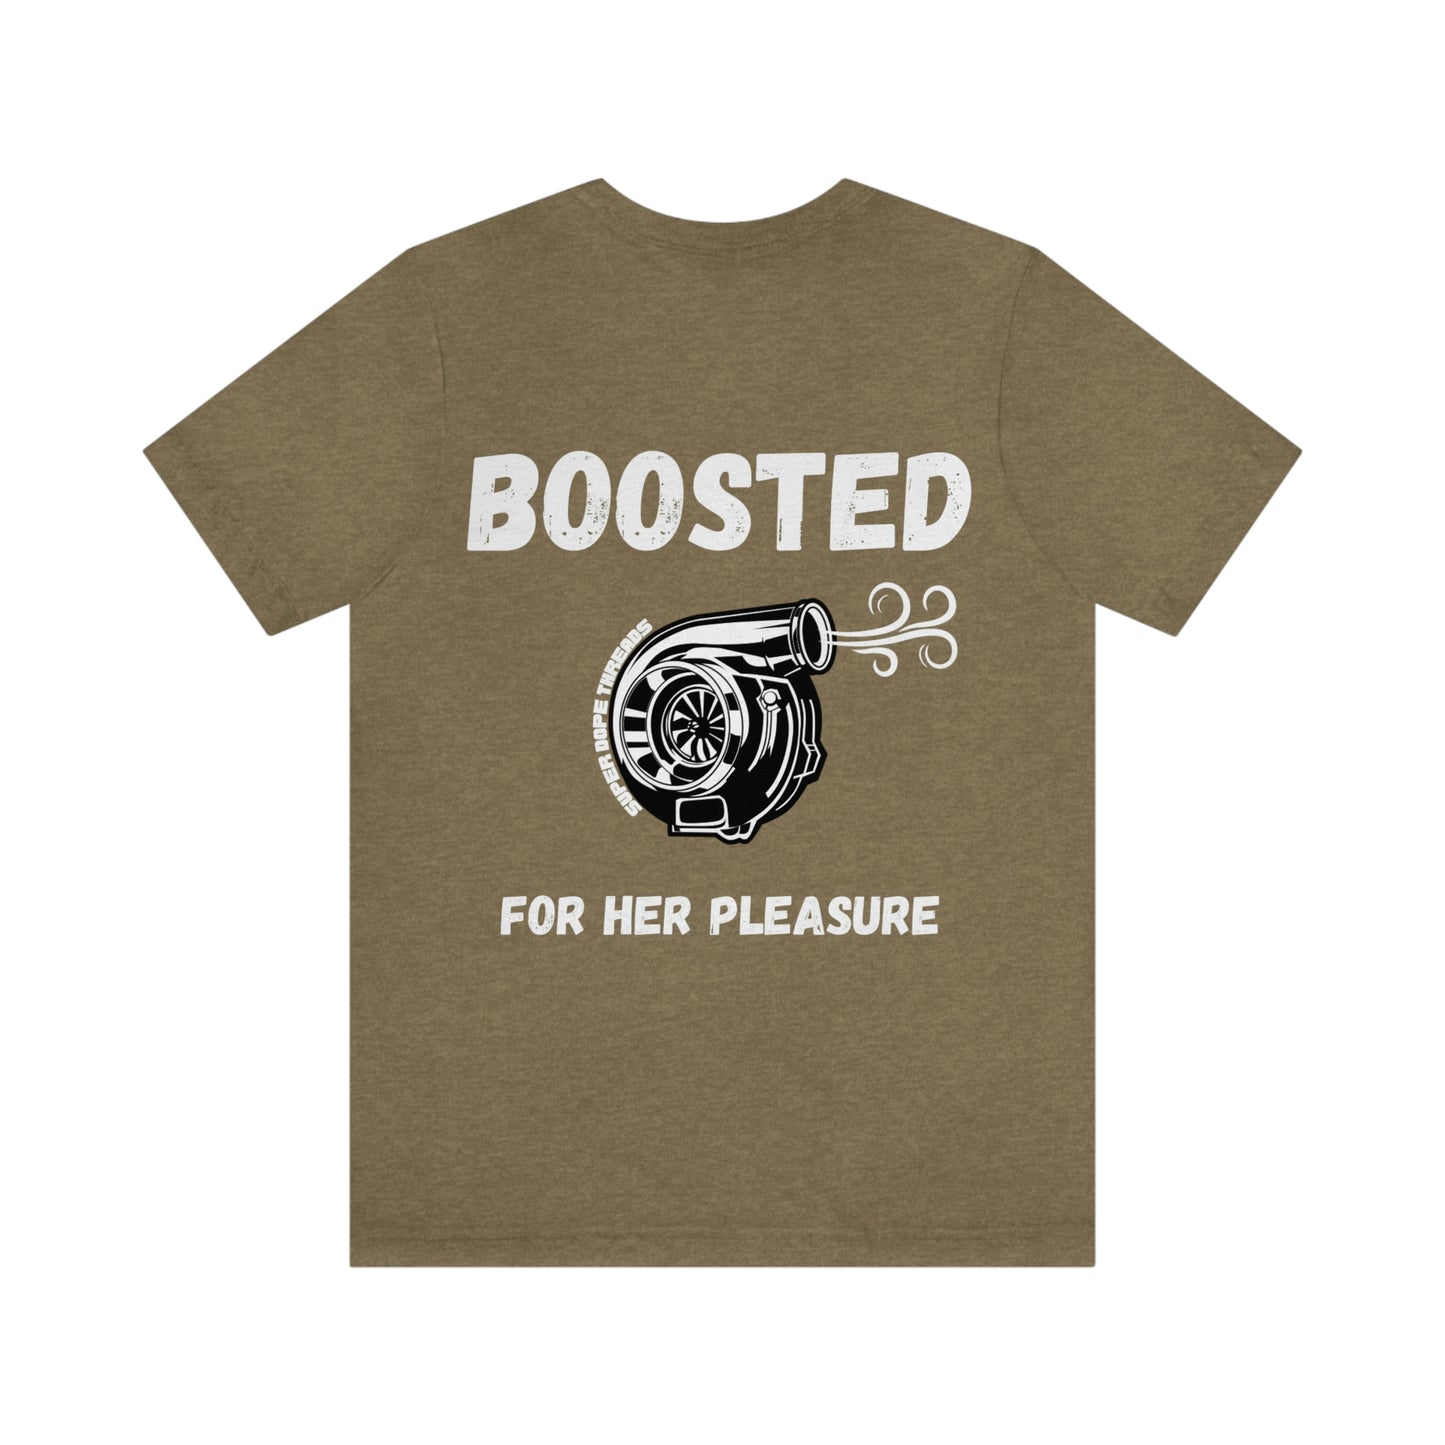 Super Dope Threads - Boosted